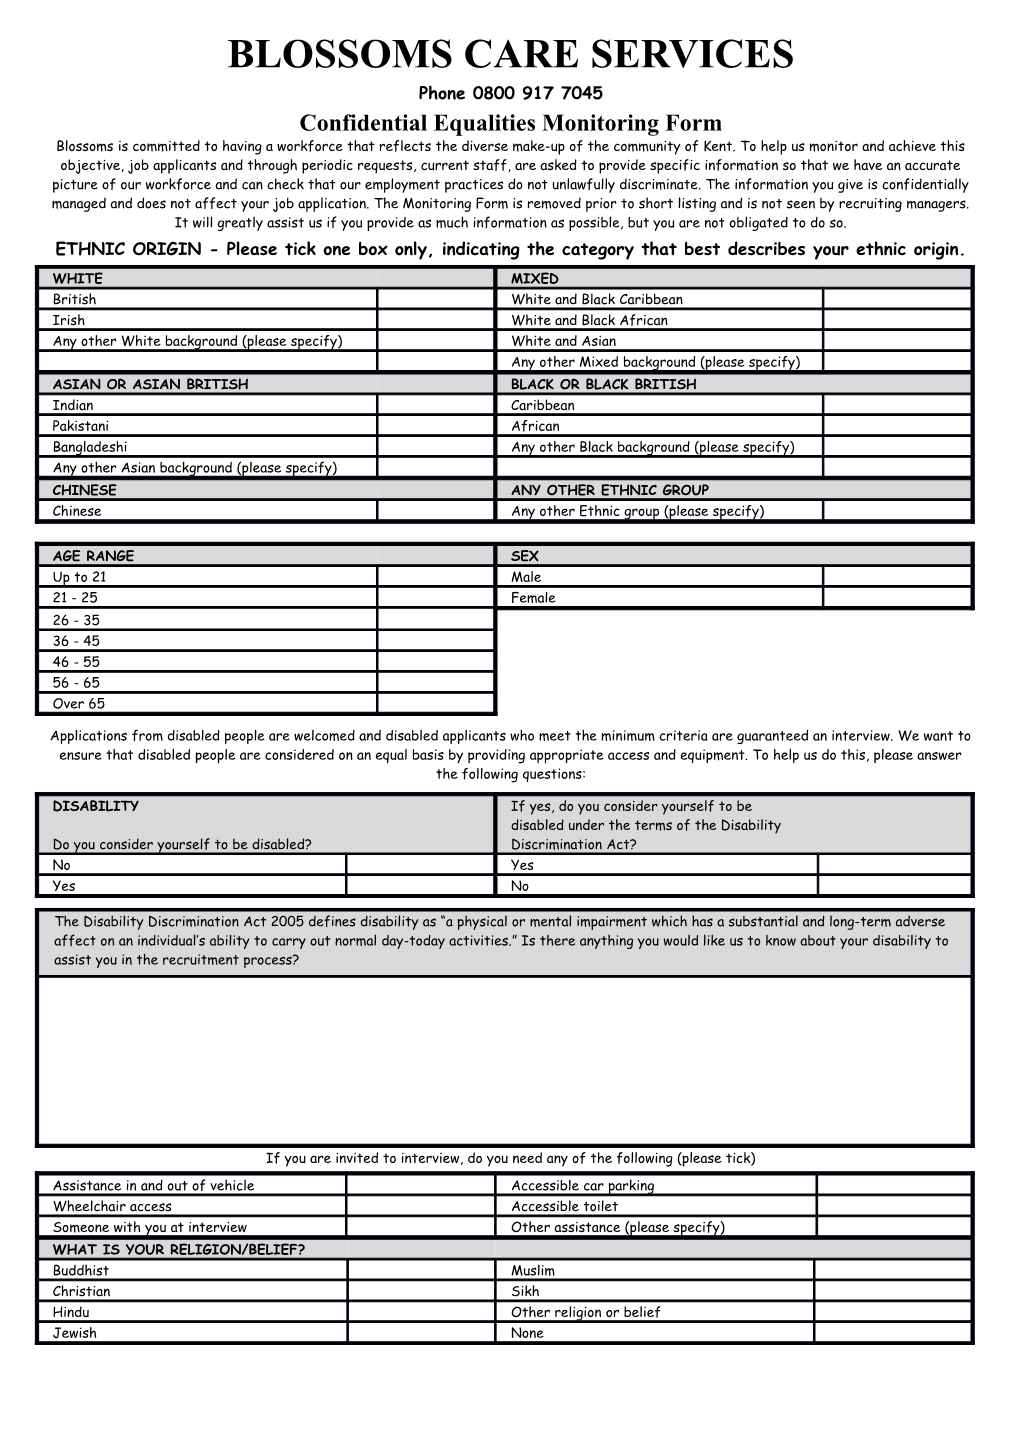 Confidential Equalities Monitoring Form